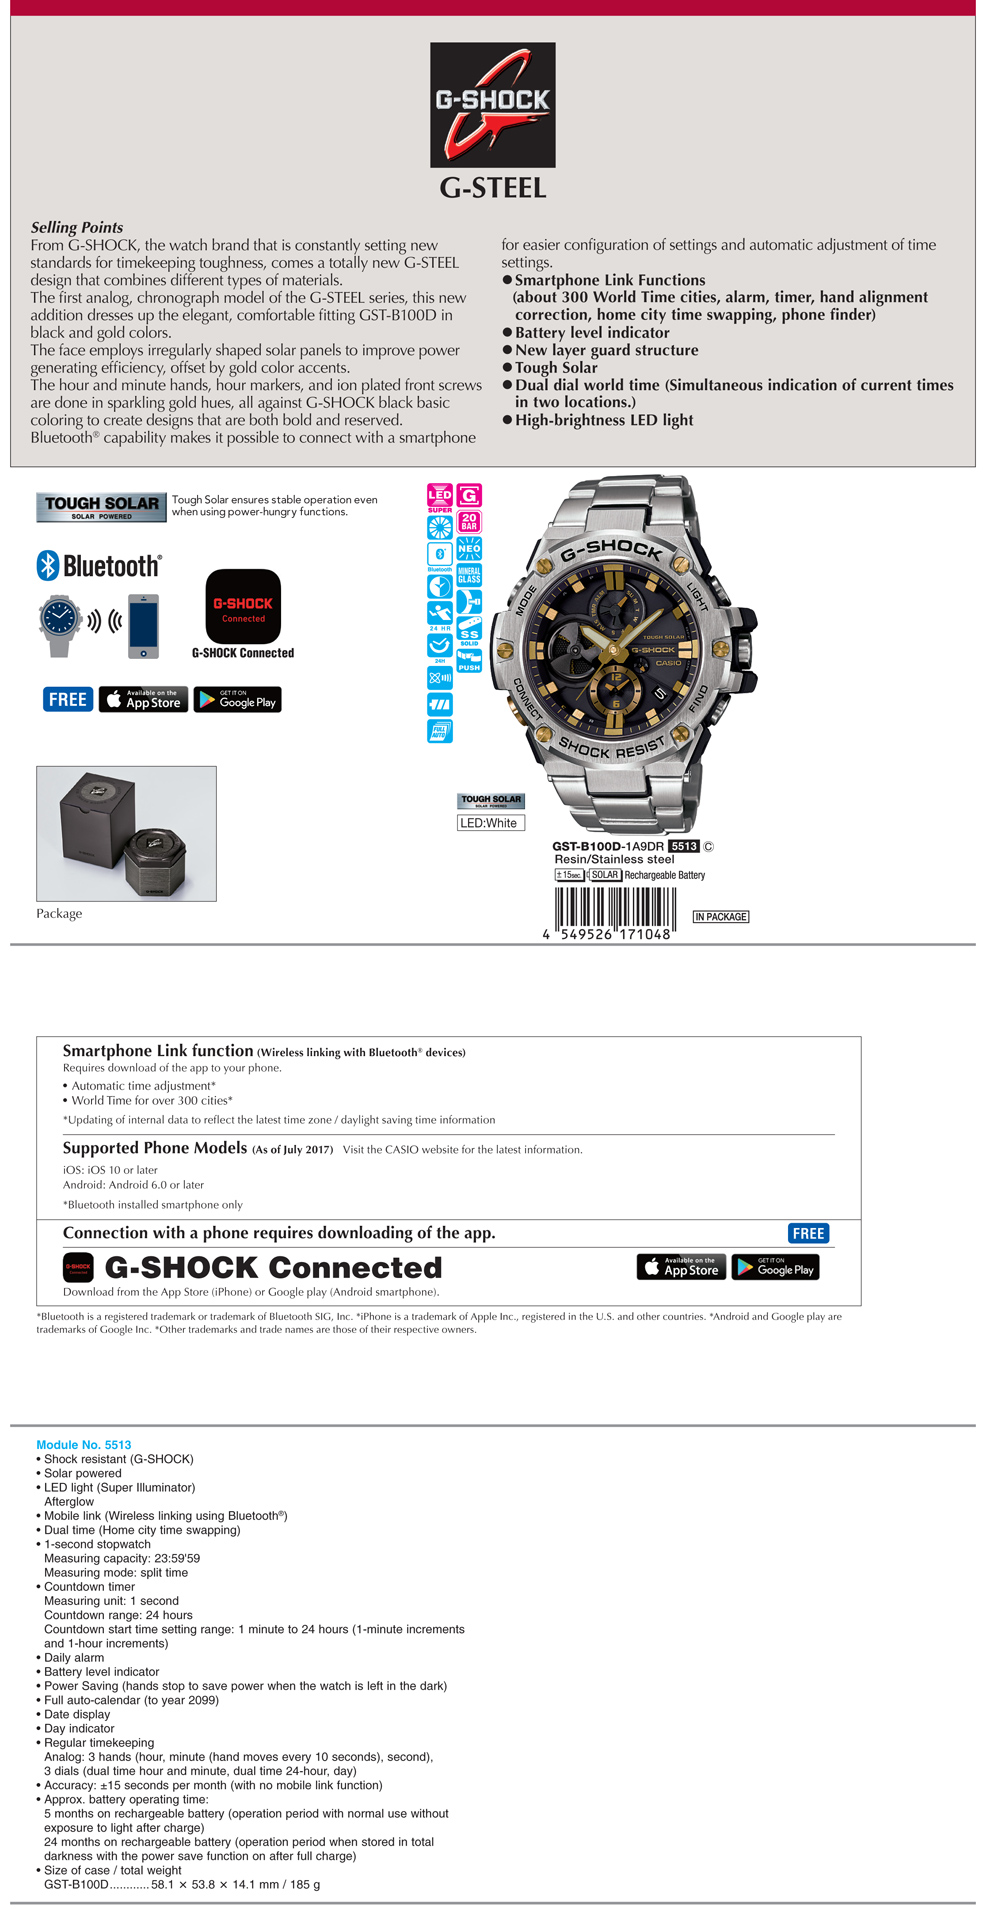 G-SHOCK, G-STEEL, Bluetooth, smartphone Link, G-SHOCK Connected App, Tough Solar, Batery level indicator, Dual dial world time, high-brighness LED light, GST-B100D-1A9